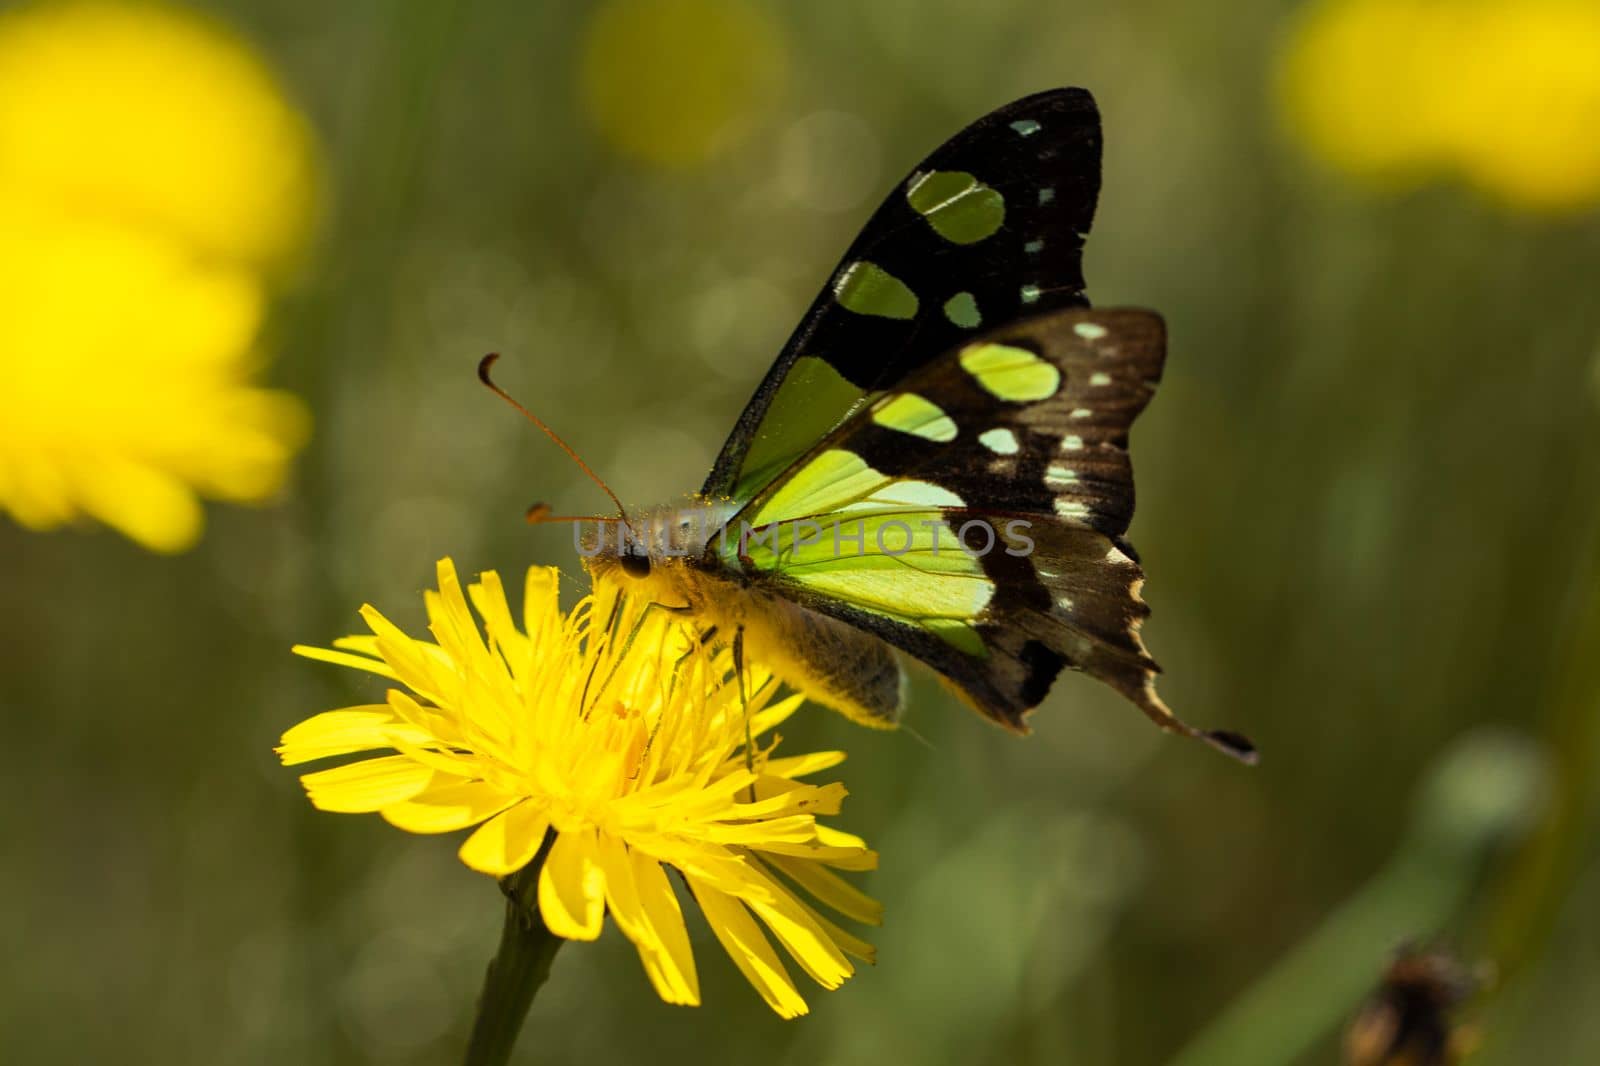 Macleay's Swallowtail Butterfly on Yellow Flower - Nature Photography by StefanMal